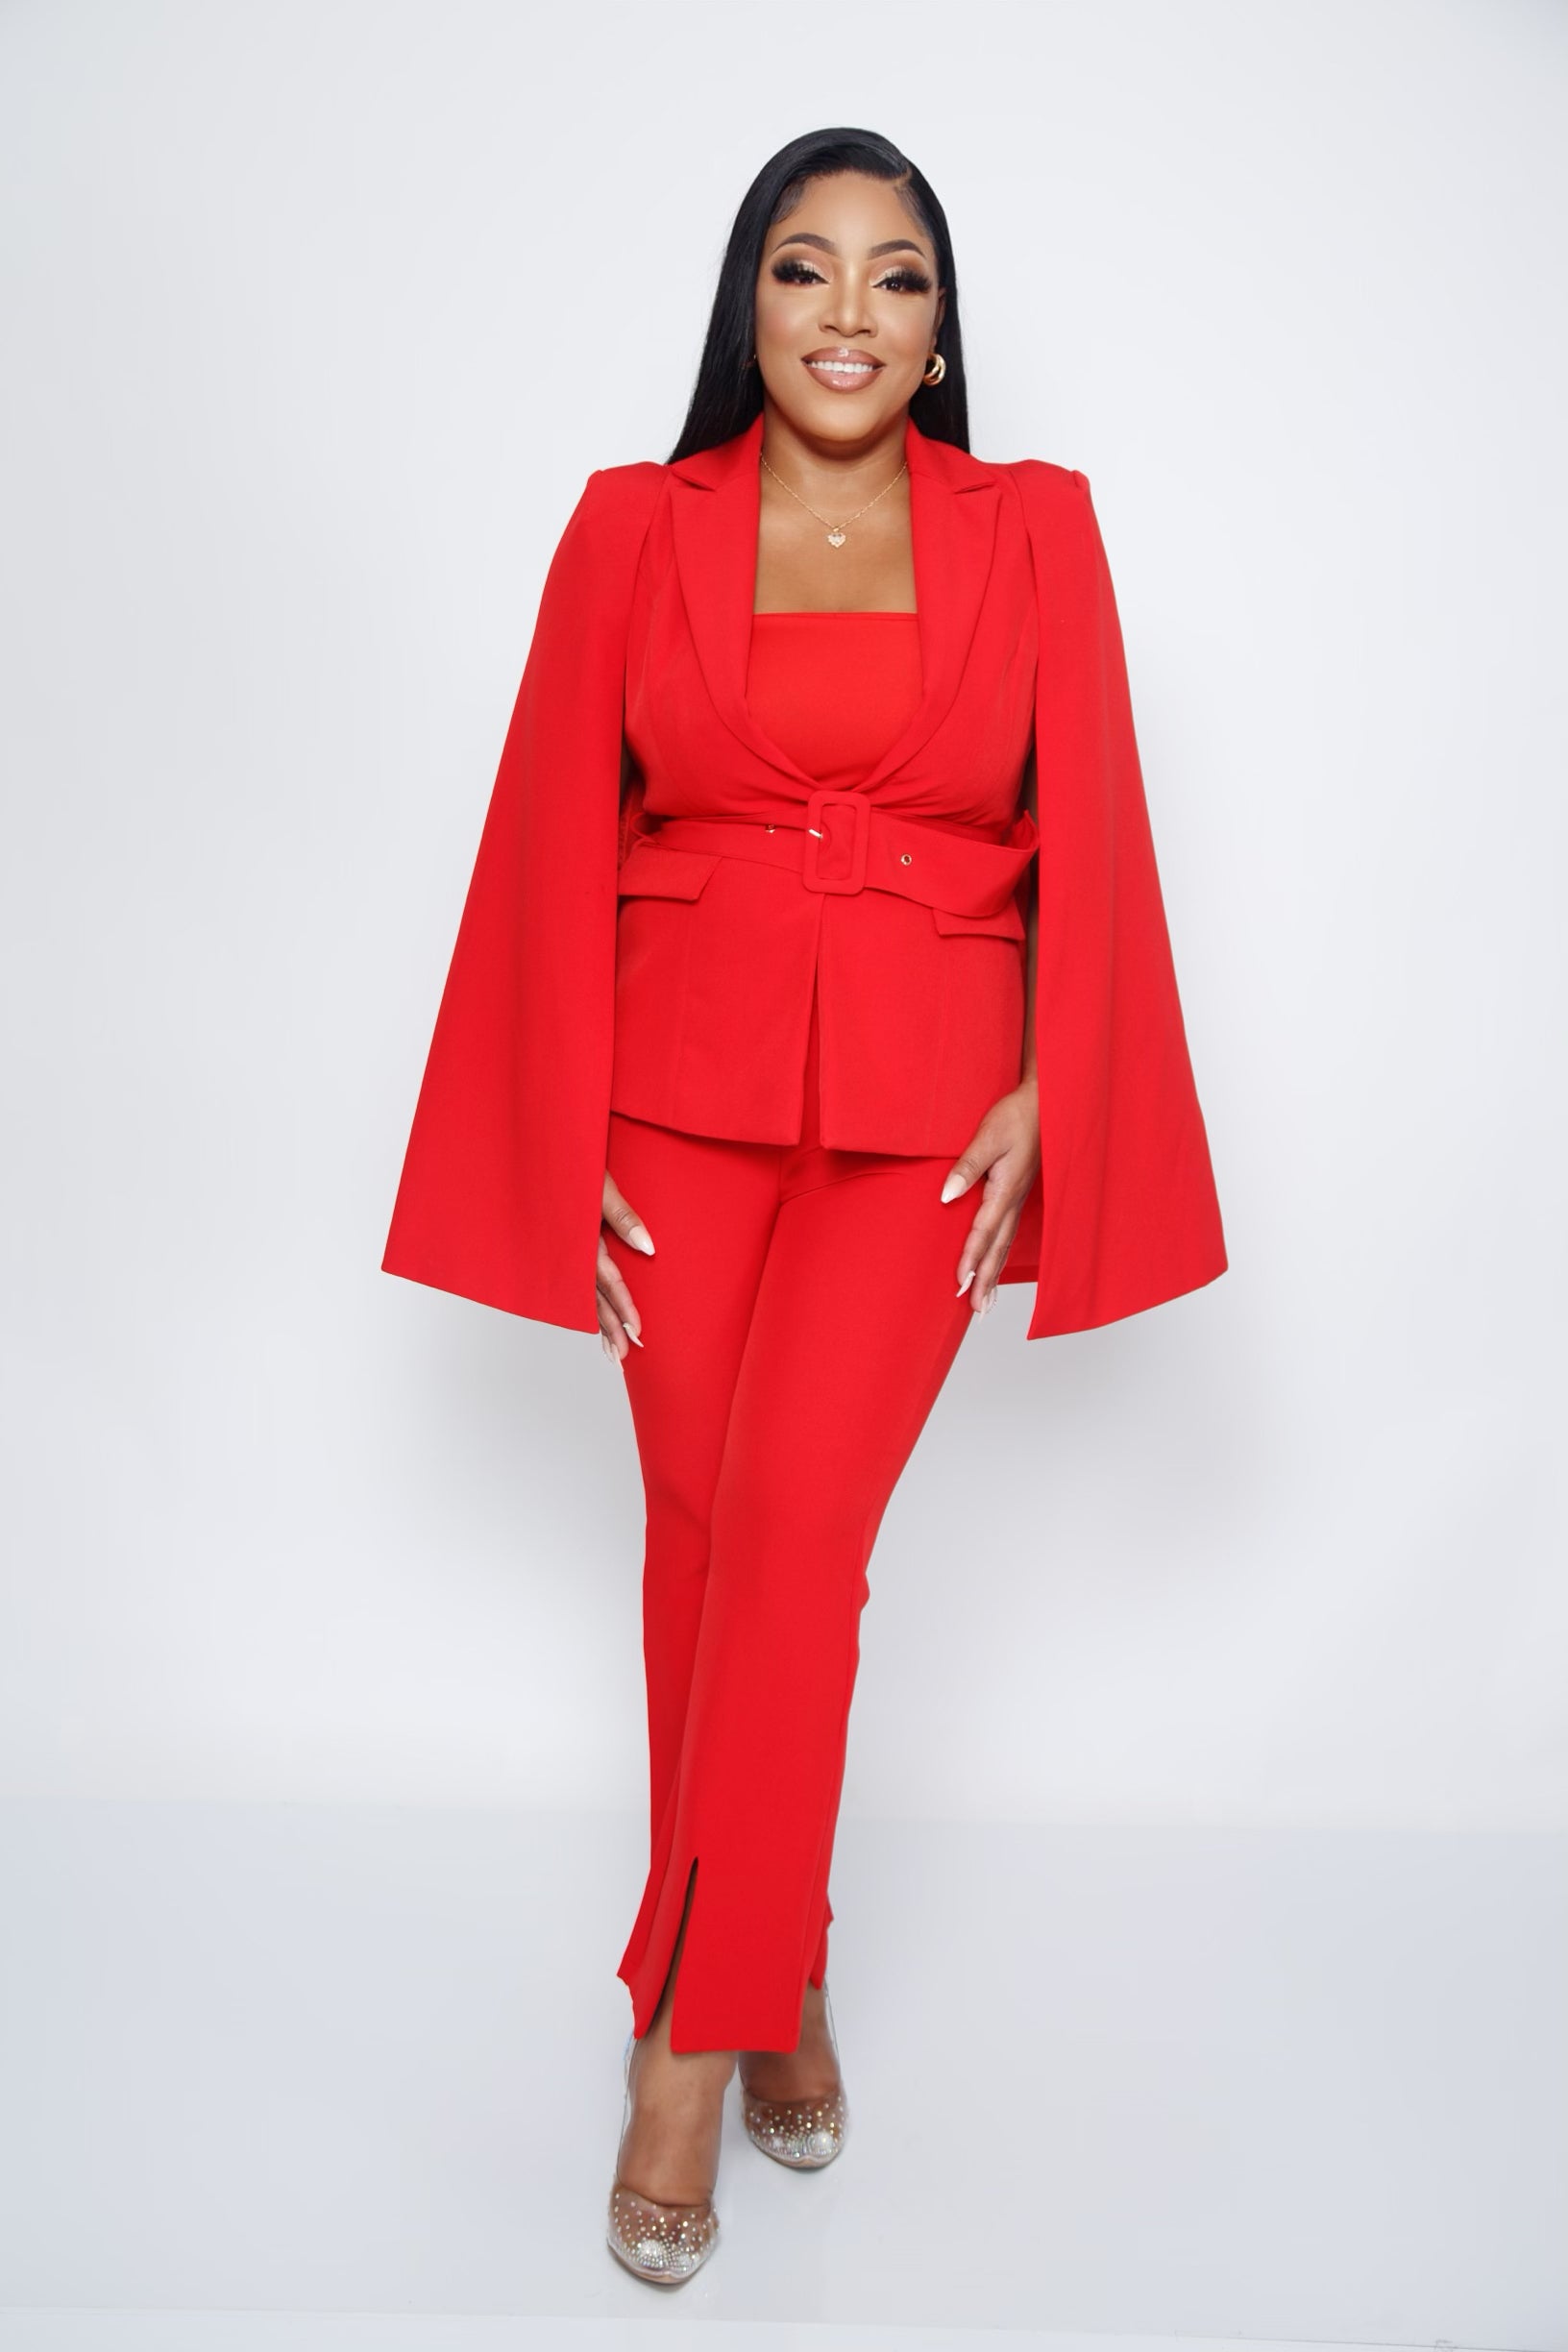 Classy and comfy professional business suit for women